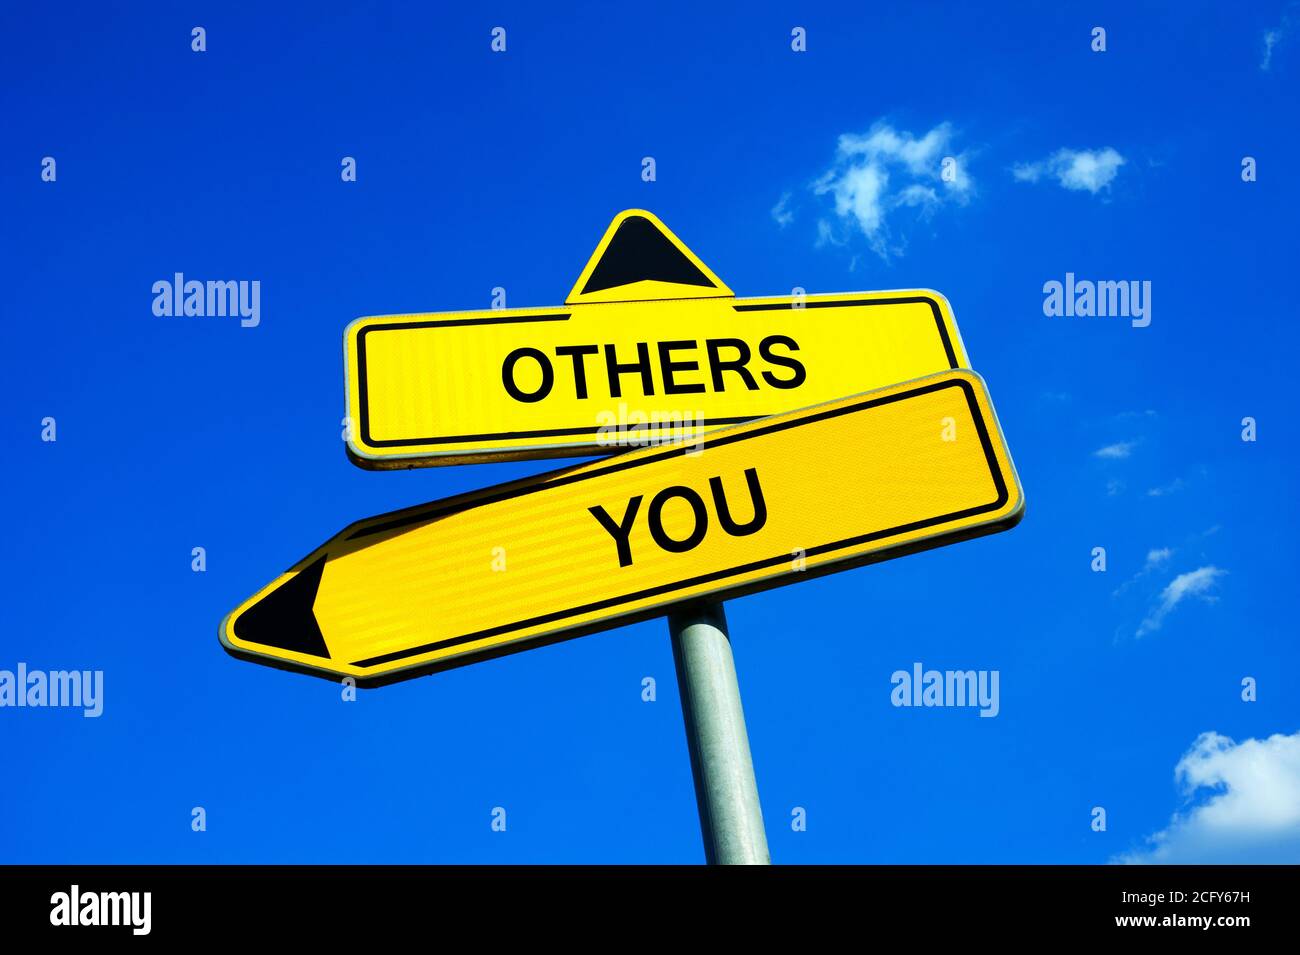 Others and You - Traffic sign with two options. Appeal and motivation to stand out of crowd and be creative, nonconformist rebel and confident origina Stock Photo